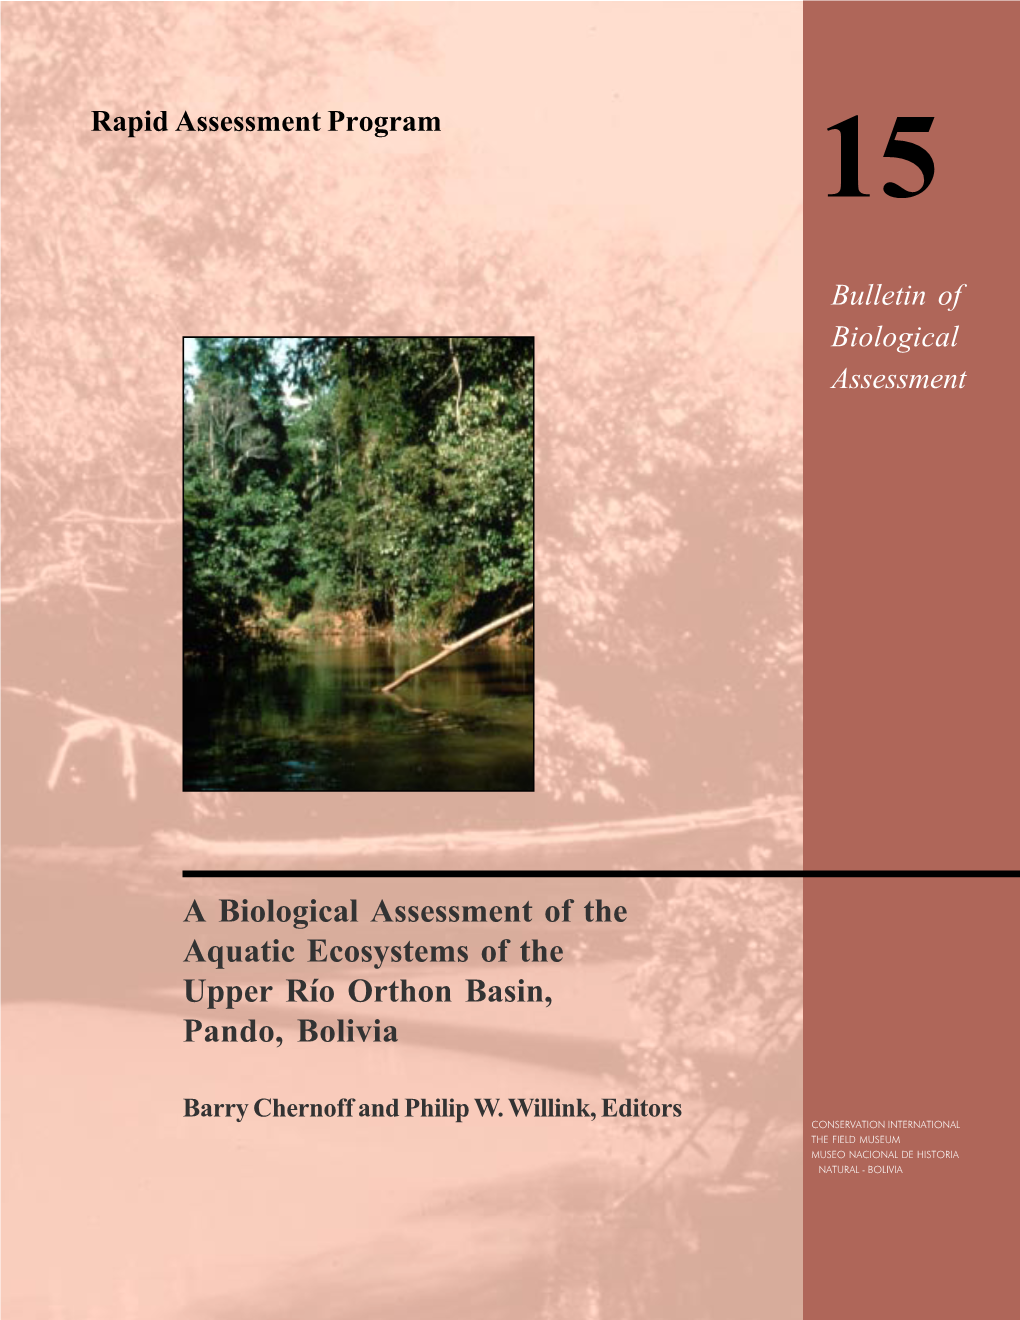 A Biological Assessment of the Aquatic Ecosystems of the Upper Río Orthon Basin, Pando, Bolivia